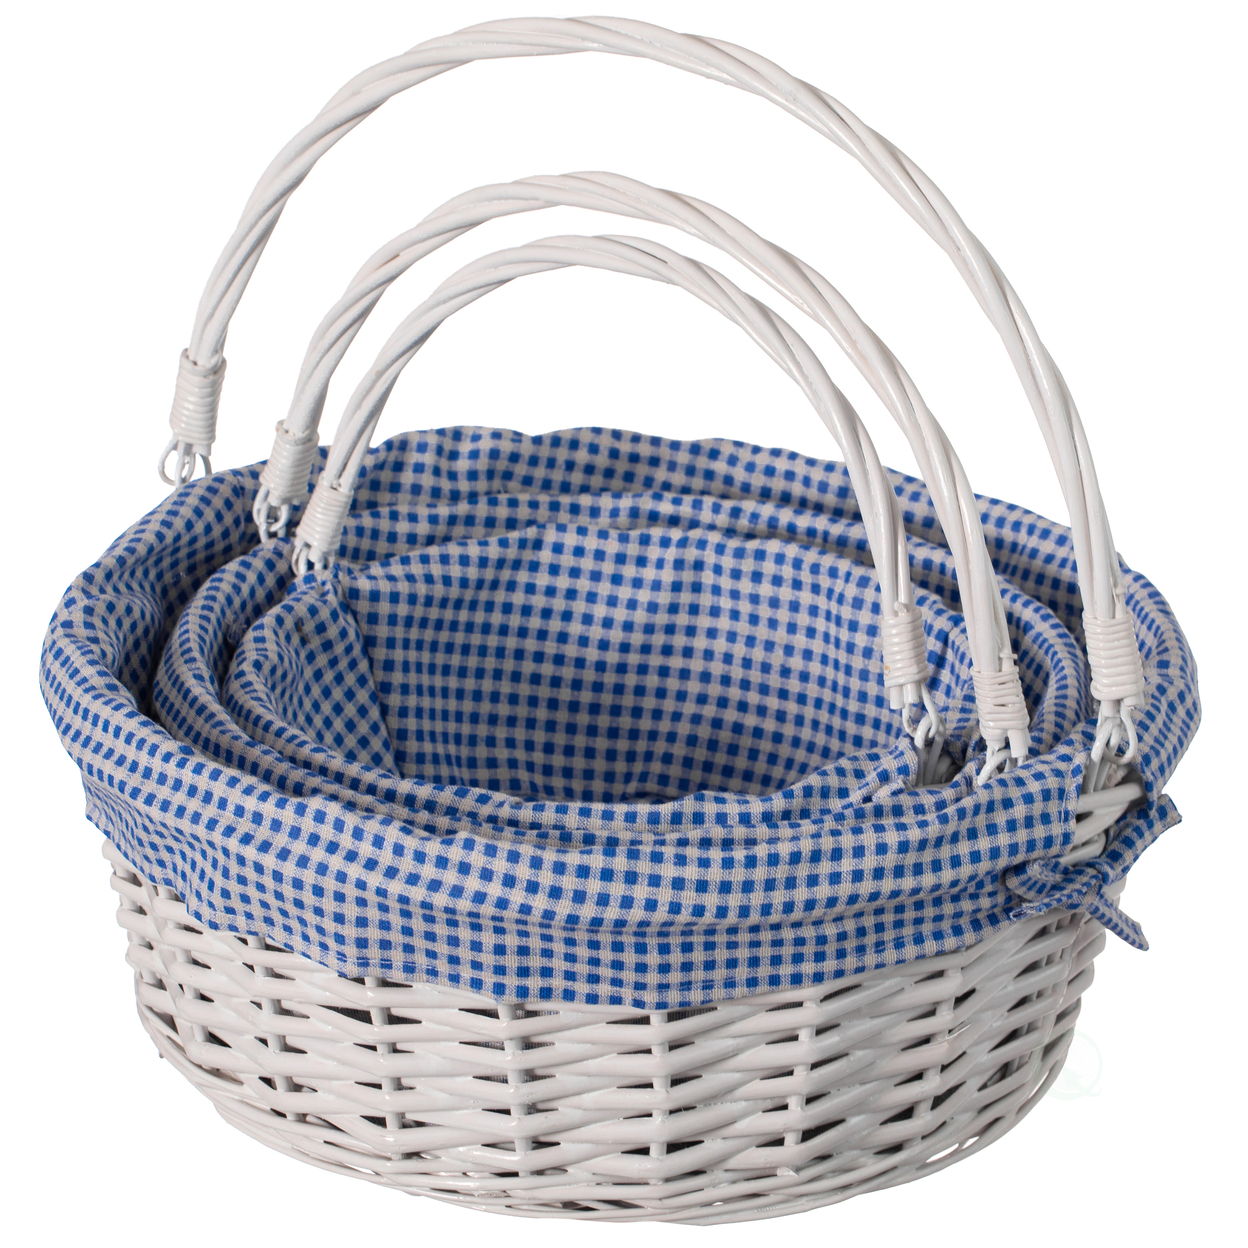 Traditional White Round Willow Gift Basket With Gingham Liner And Sturdy Foldable Handles, Food Snacks Storage Basket - Pink, Large